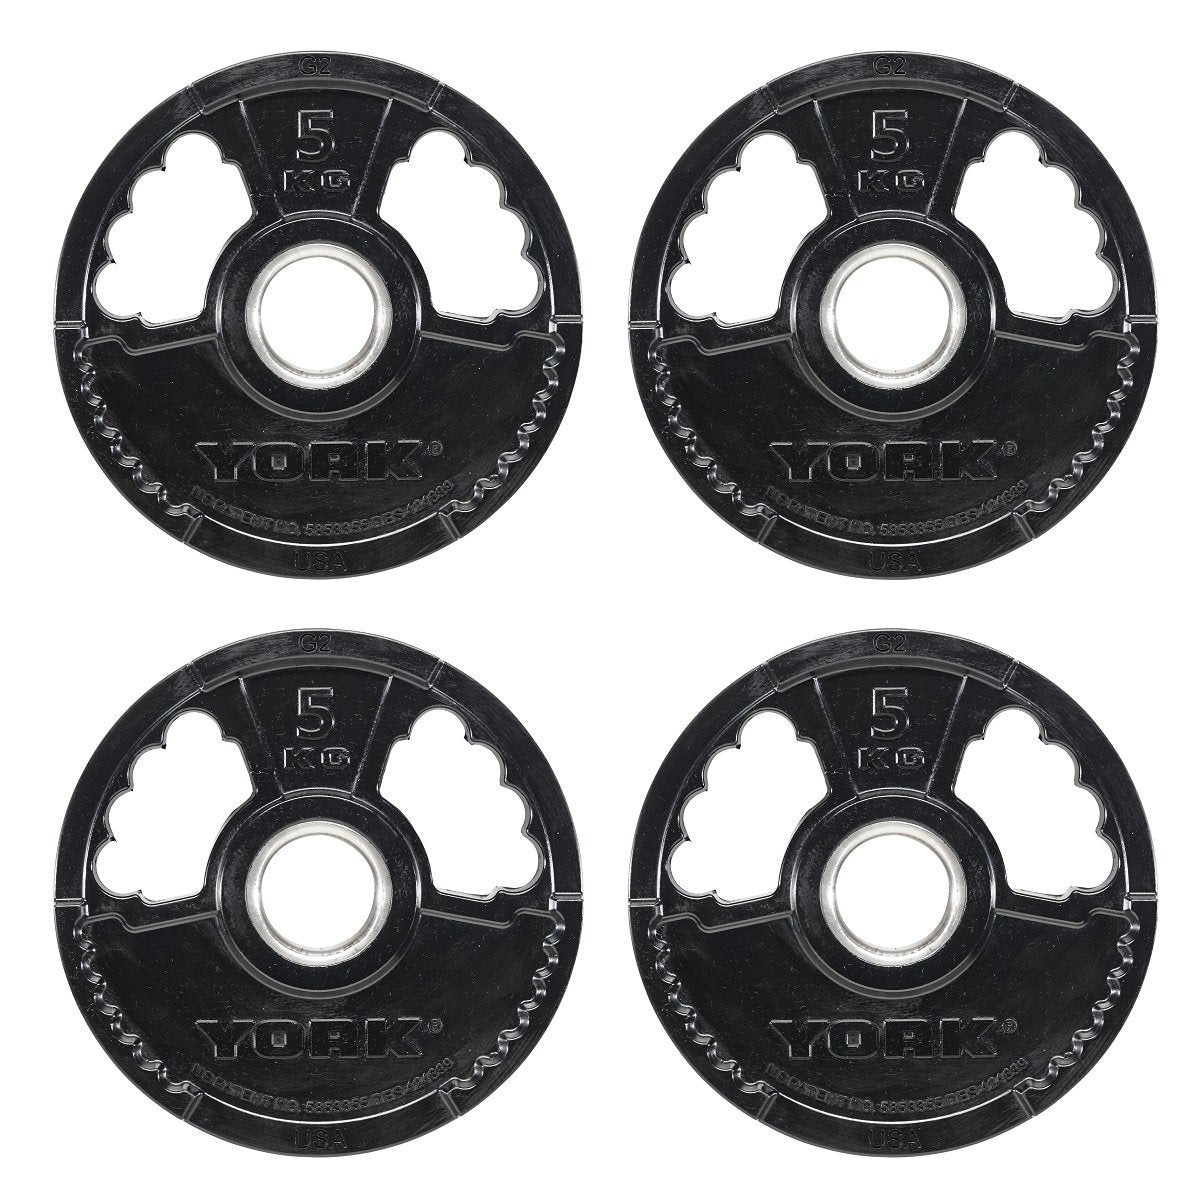 York 4 x 5kg G2 Rubber Thin Line Olympic Weight Plates